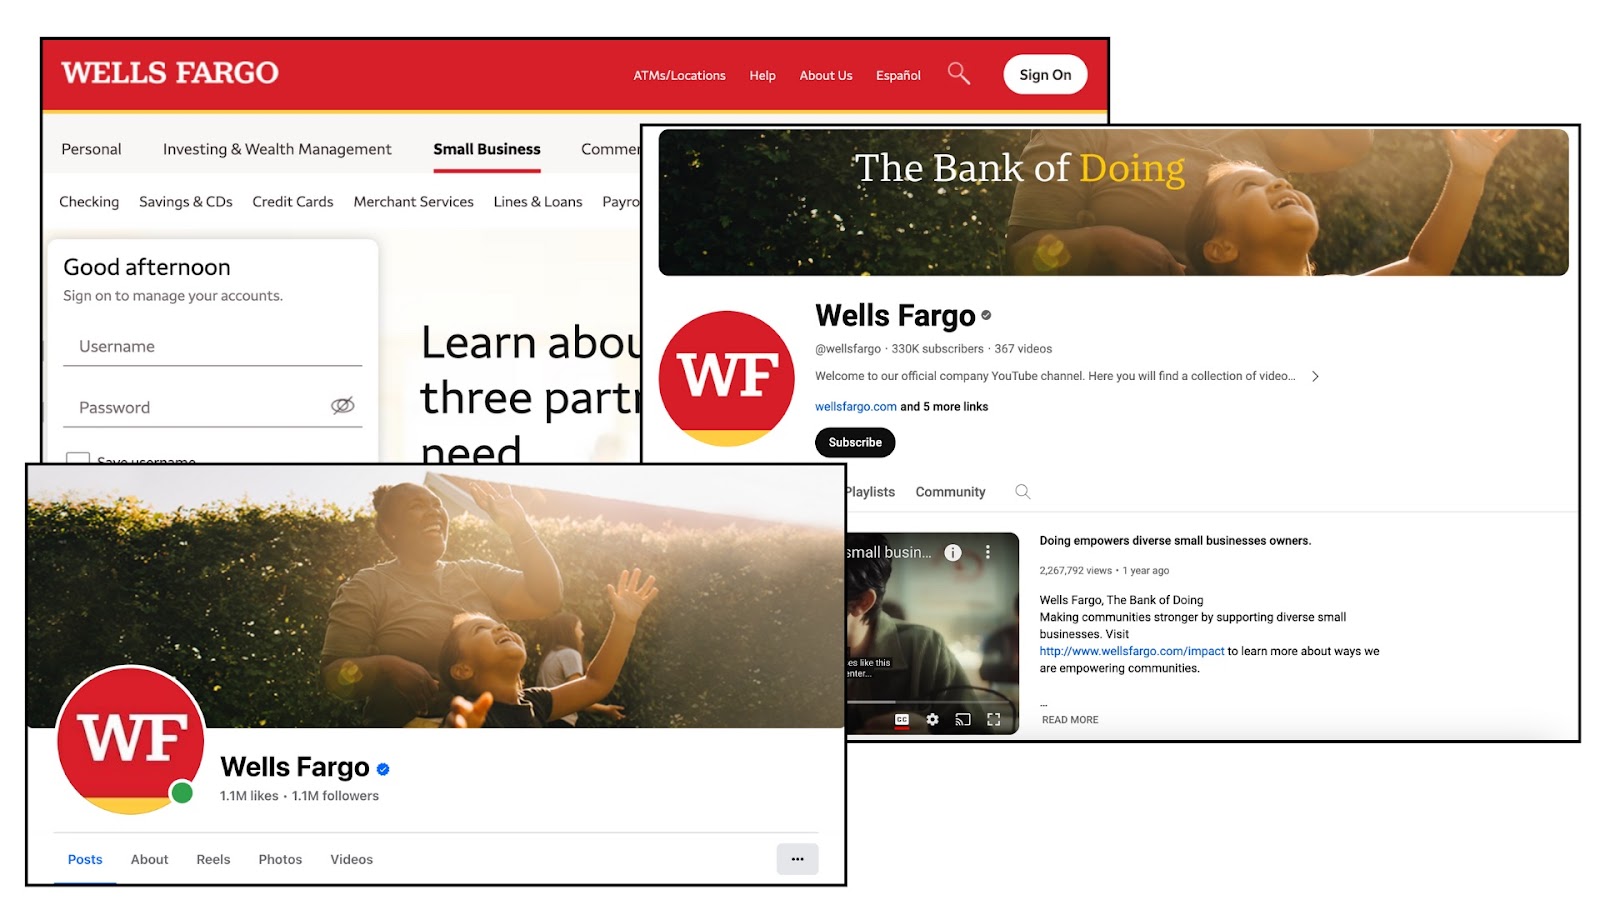 wells fargo website, facebook profile, and youtube page with consistent branding